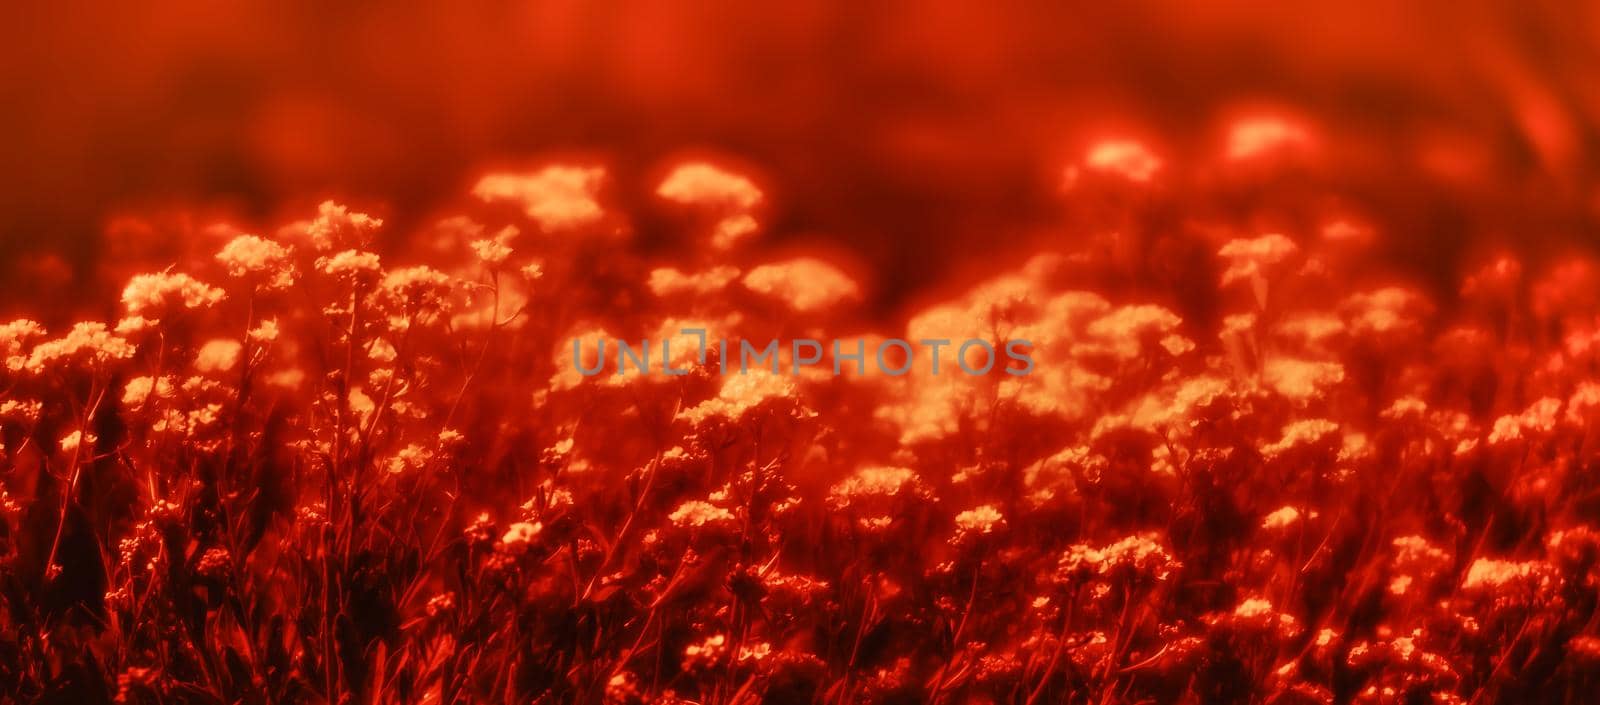 Natural background and texture. Soft focus image of small flowers of aurinia saxatilis in a dramatic red tone